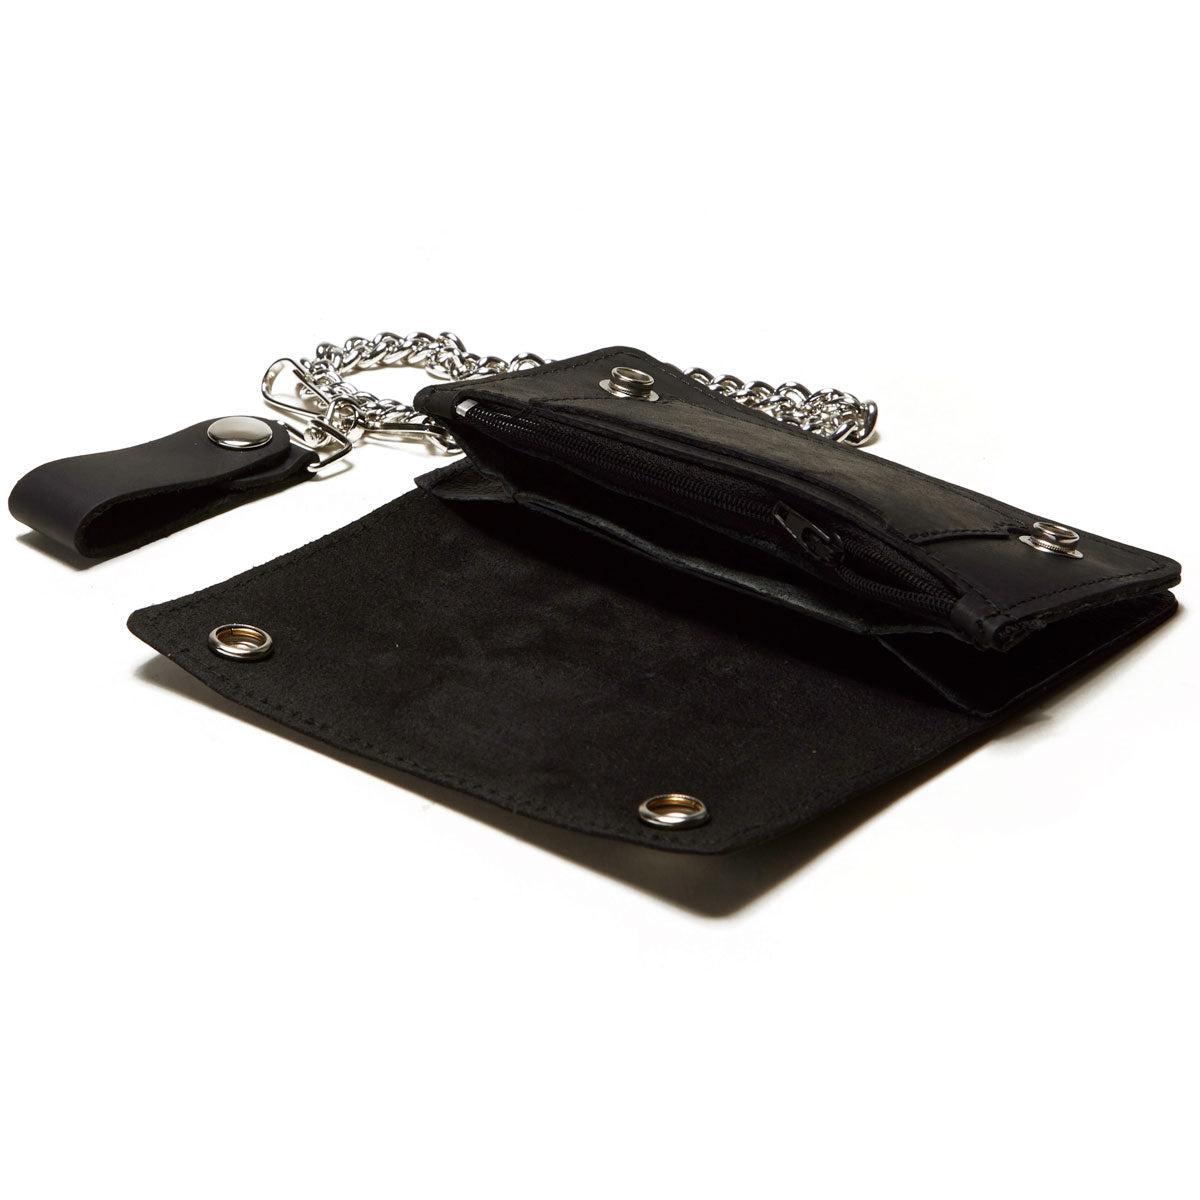 Dogtown Suicidal Large Leather Chain Wallet - Black image 2